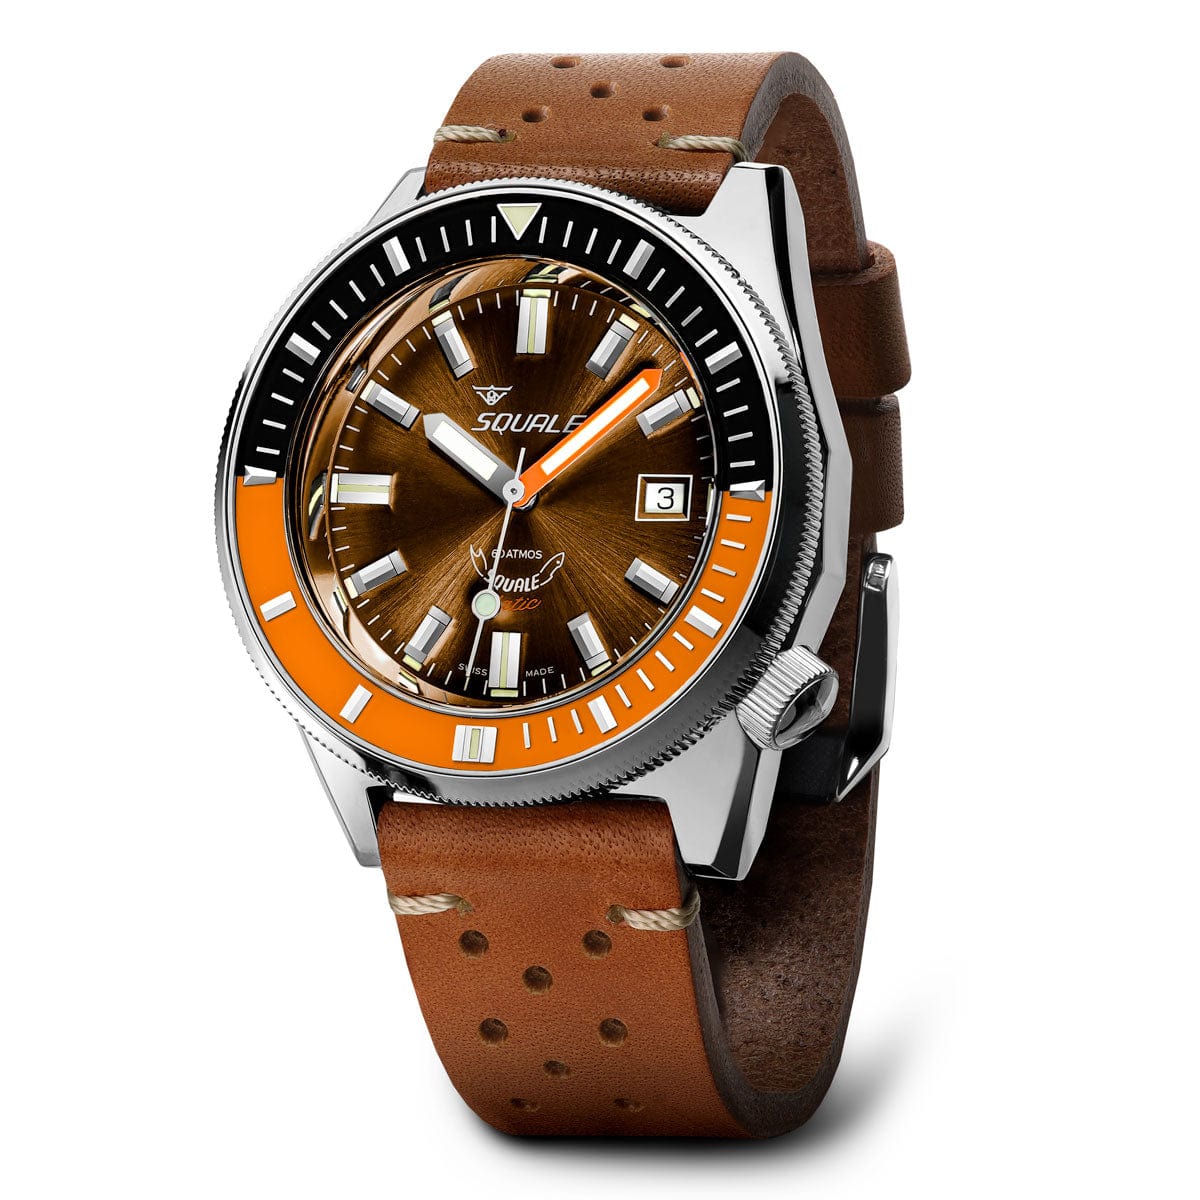 Squale Matic Swiss Diver's Watch - Leather Strap - Brown - NEARLY NEW